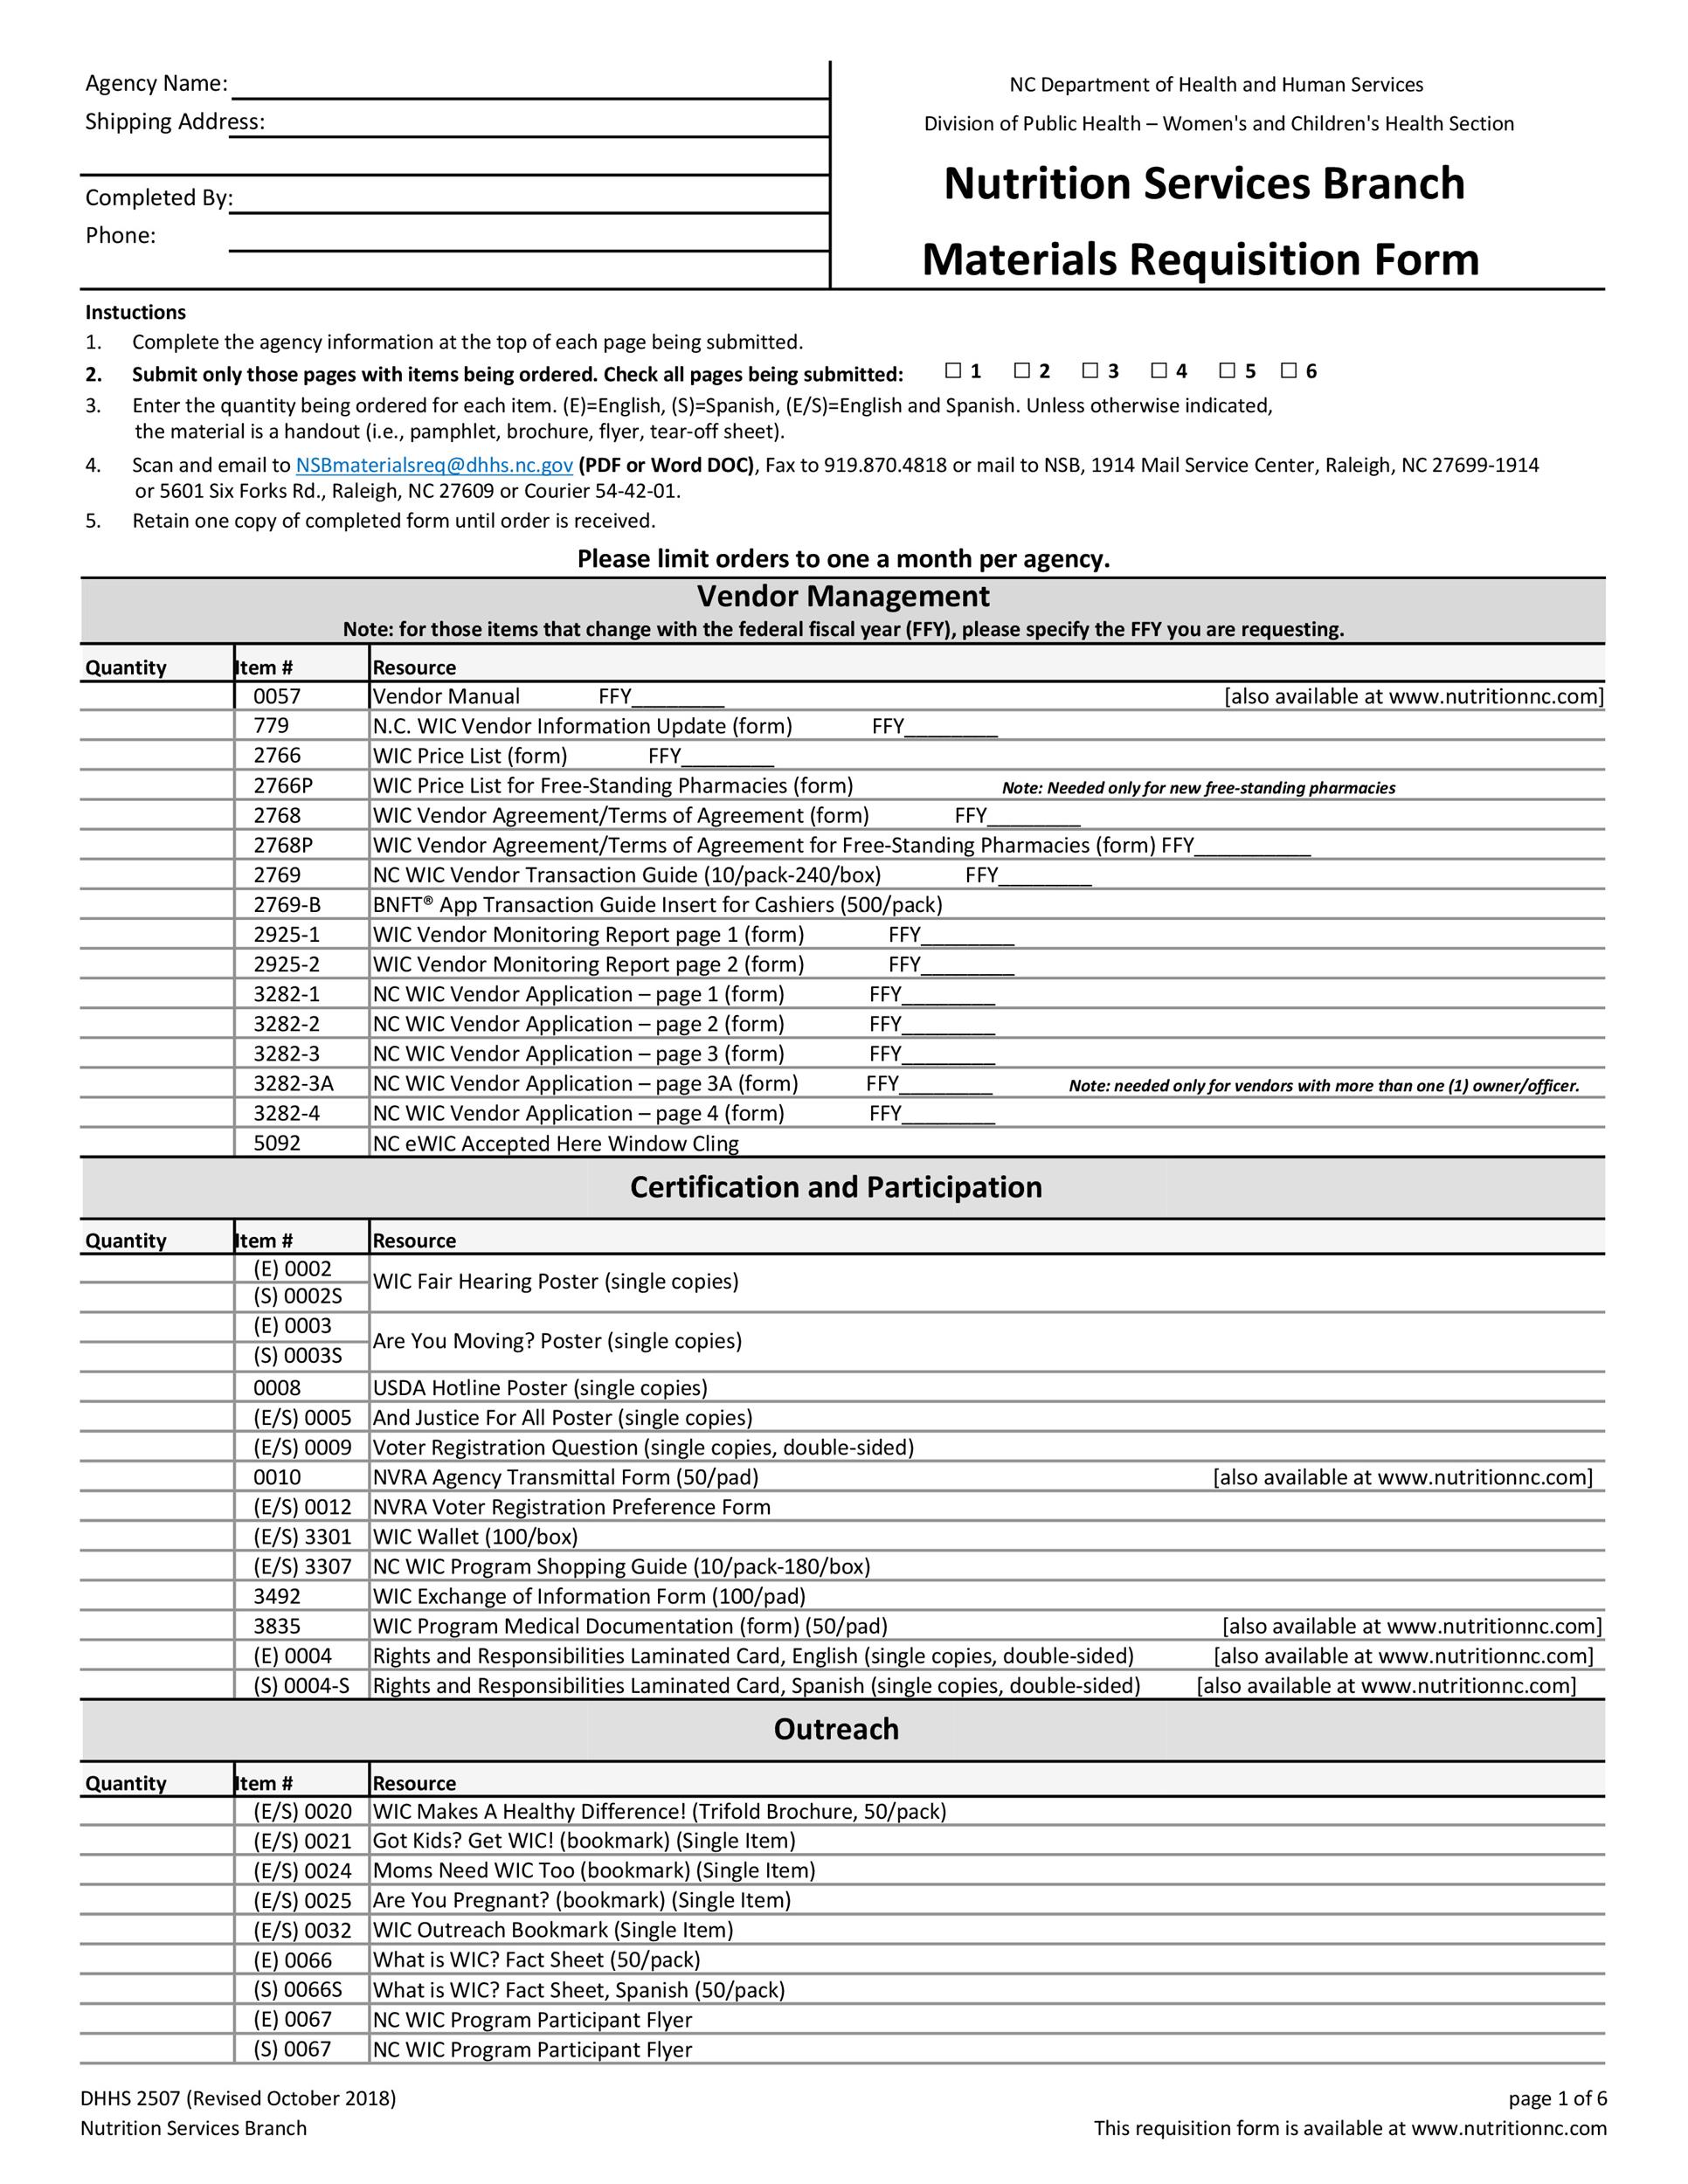 Free requisition form 02